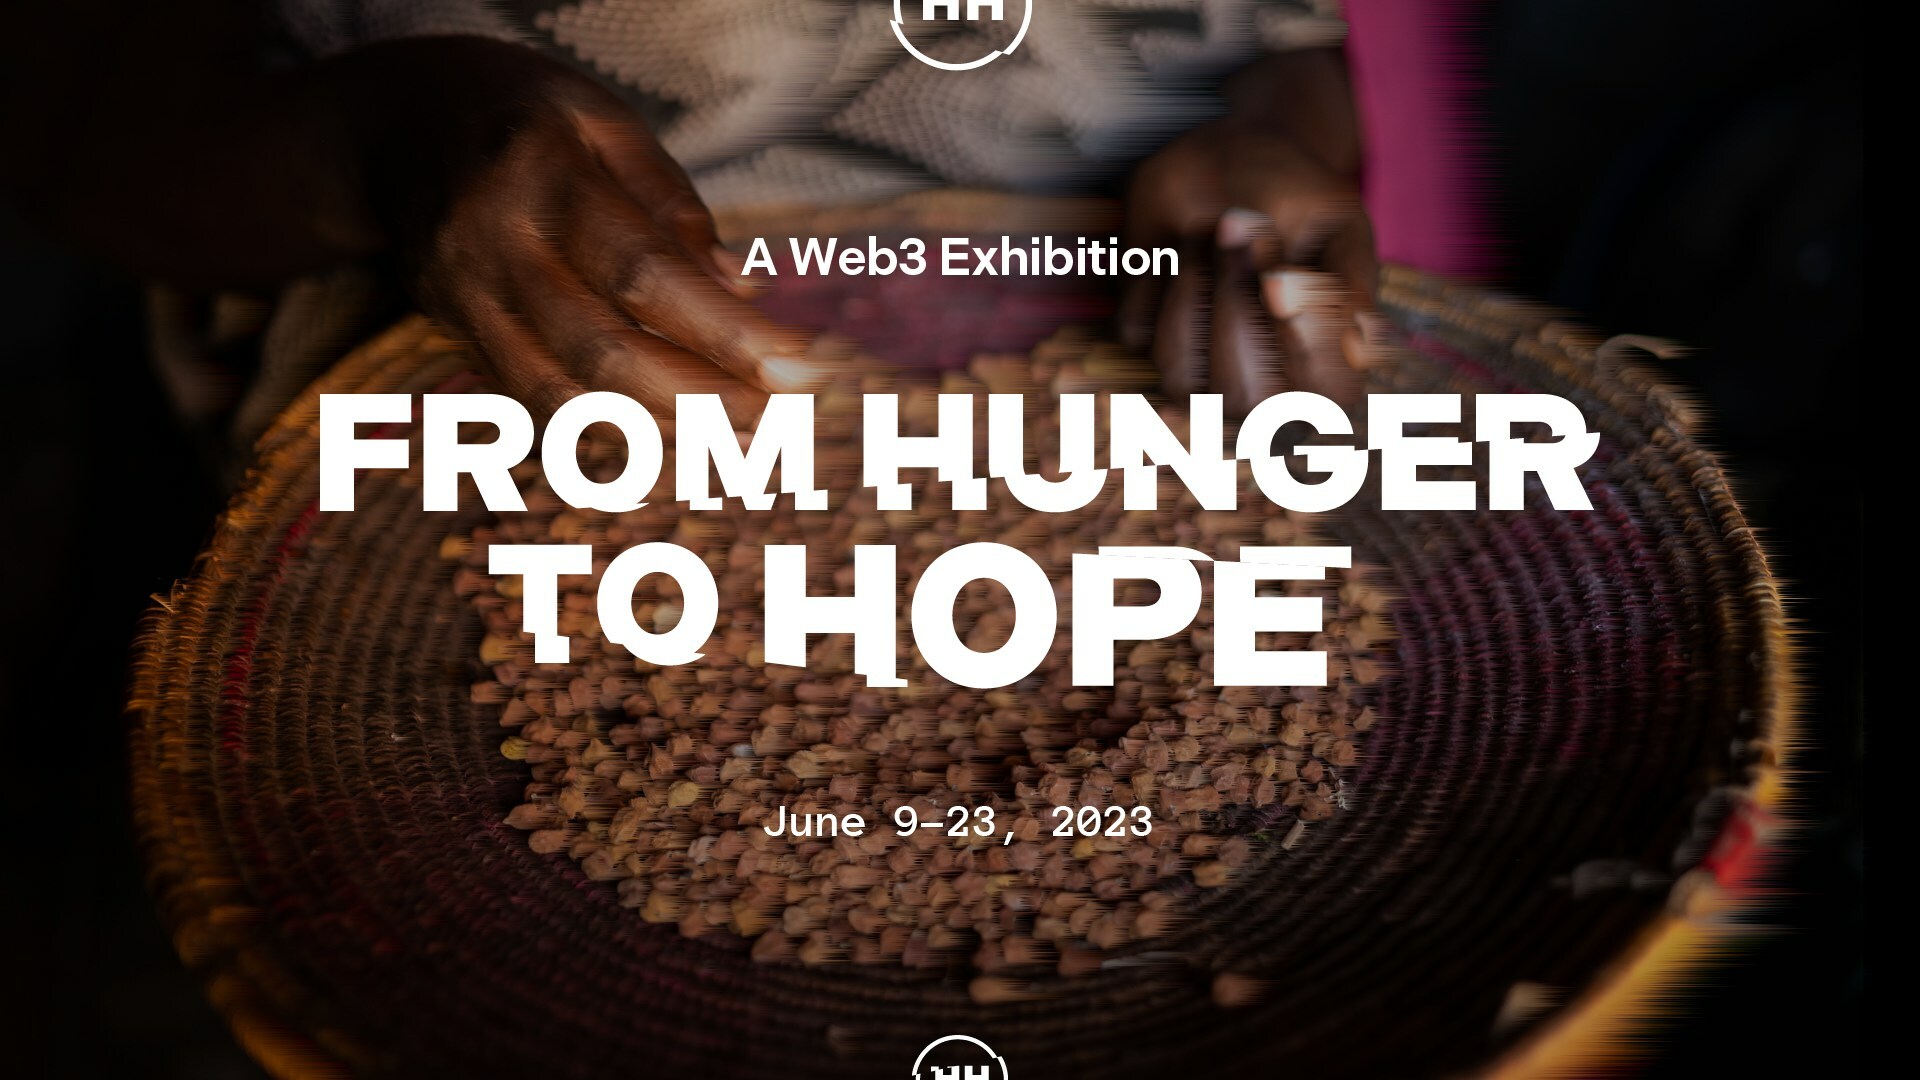 "From Hunger to Hope" a web3 art exhibition fighting hunger around the globe, will run from June 9-23.